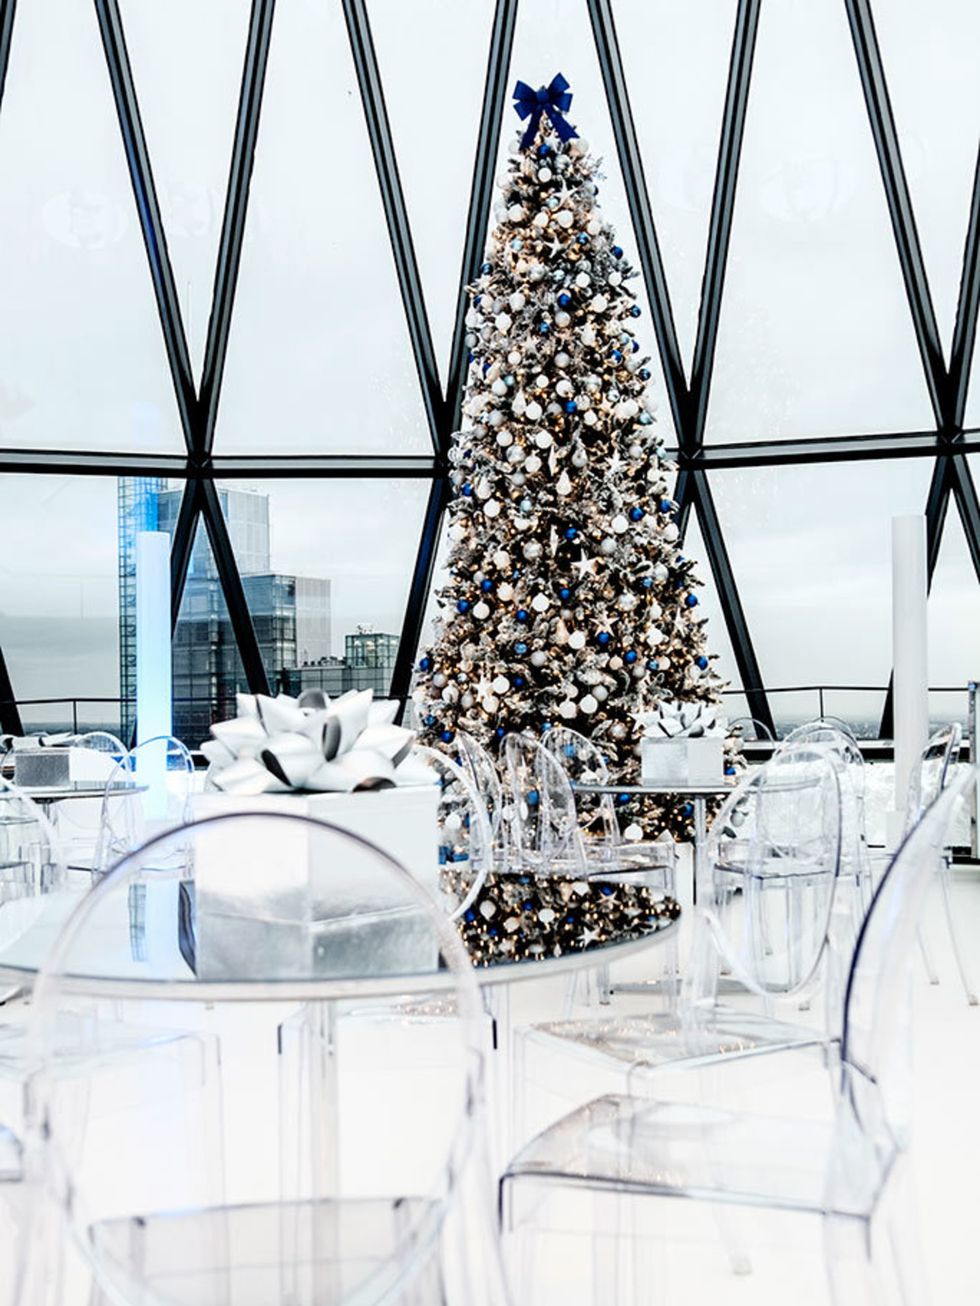 <p>DRINK: Snow Globe in the Sky</p>

<p>Anyone fancy getting high this Christmas? In the literal sense, we mean: 40 storeys up (not sure what you were thinking). Well, heres your chance, at this gorgeous new festive pop-up at the top of The Gherkin. Its 